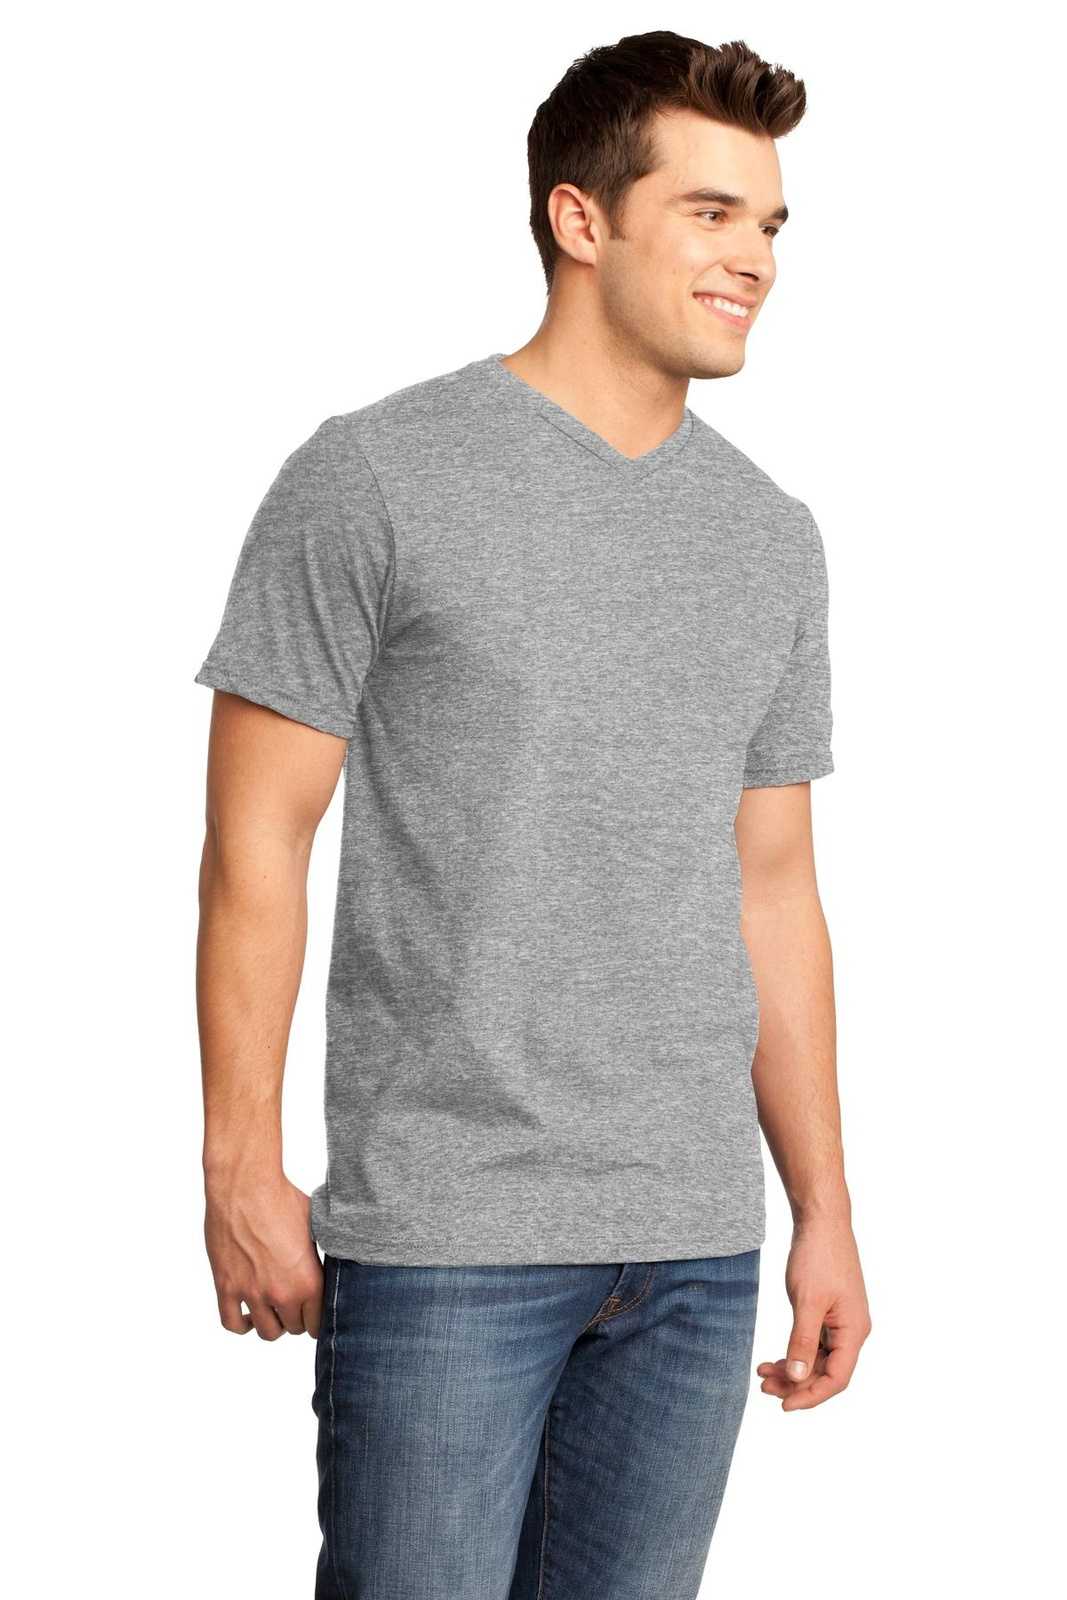 District DT6500 Very Important Tee V-Neck - Light Heather Gray - HIT a Double - 4